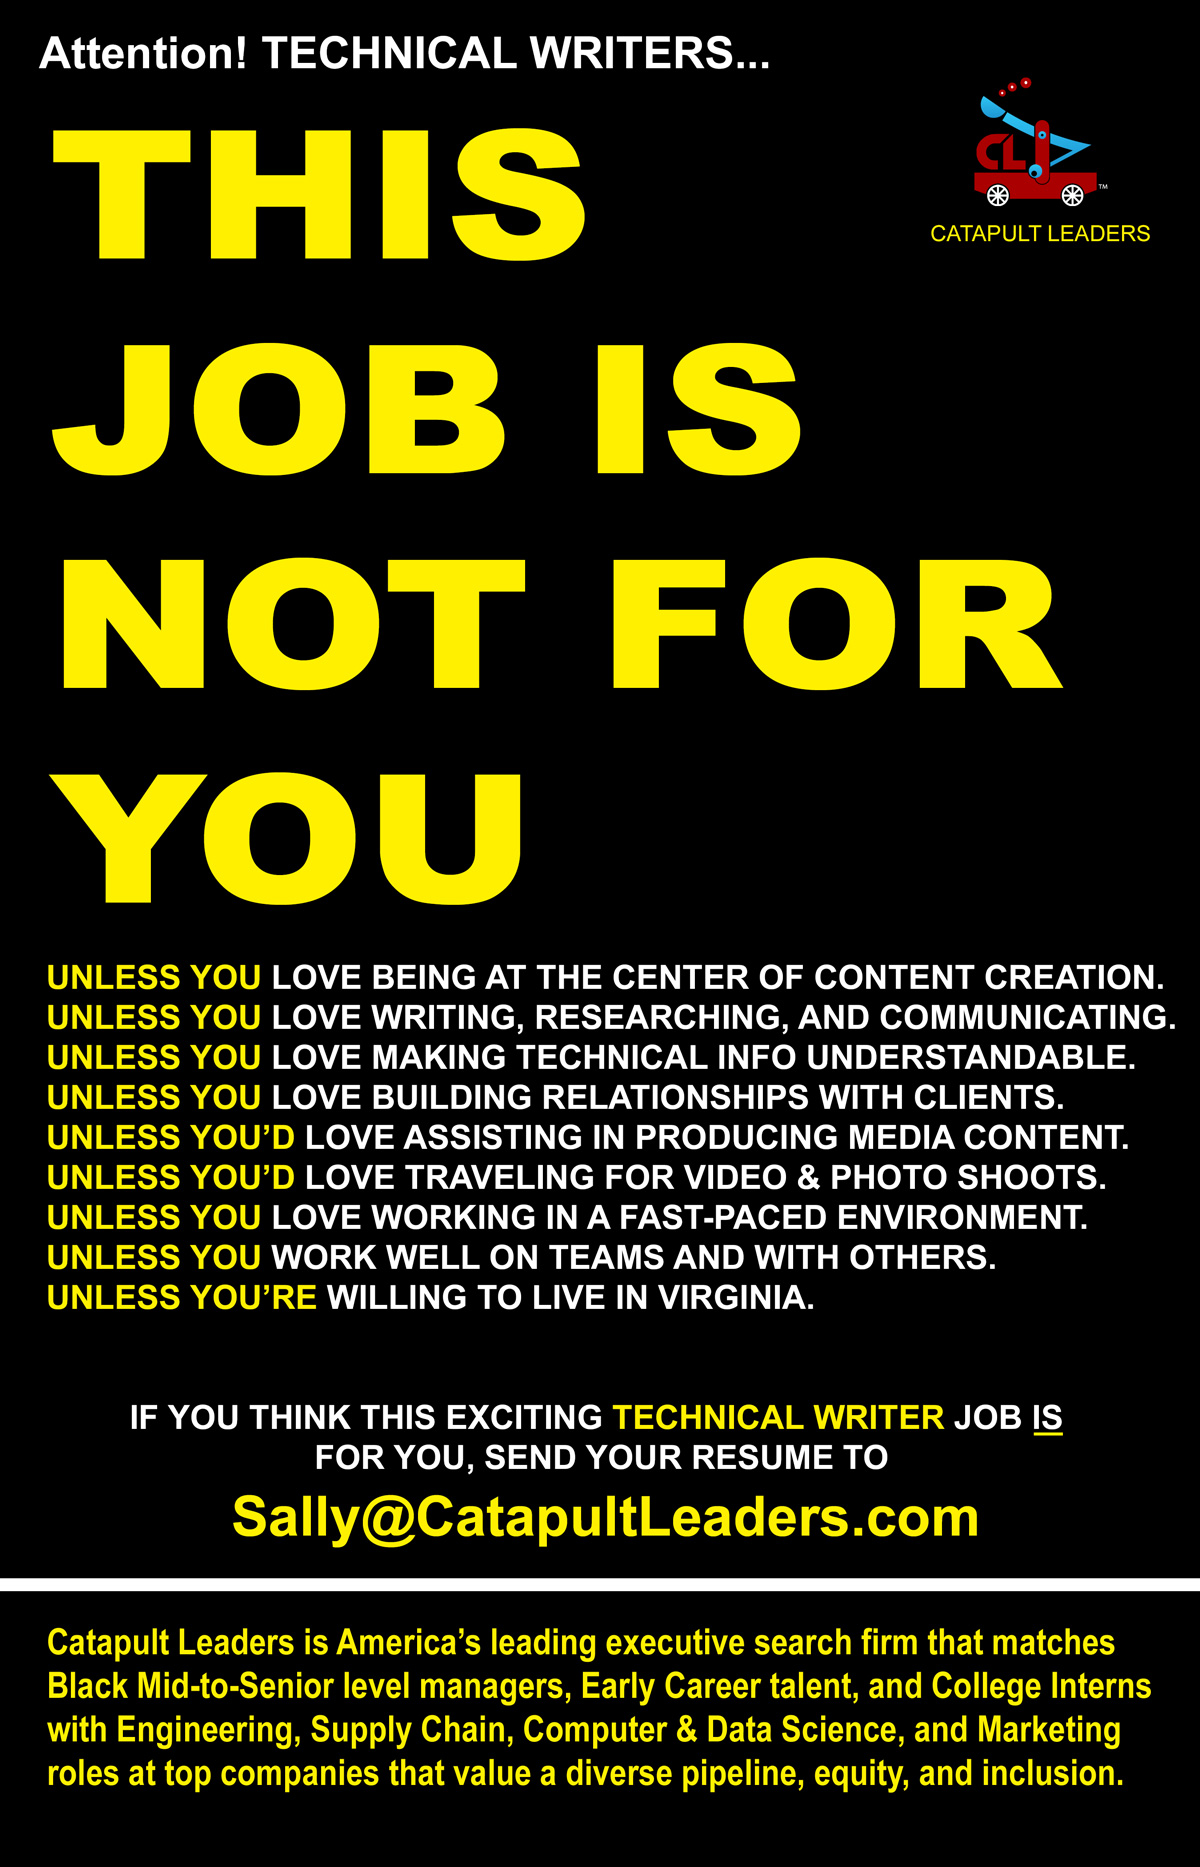 This Job Not for You - Technical Writer - Catapult Leaders